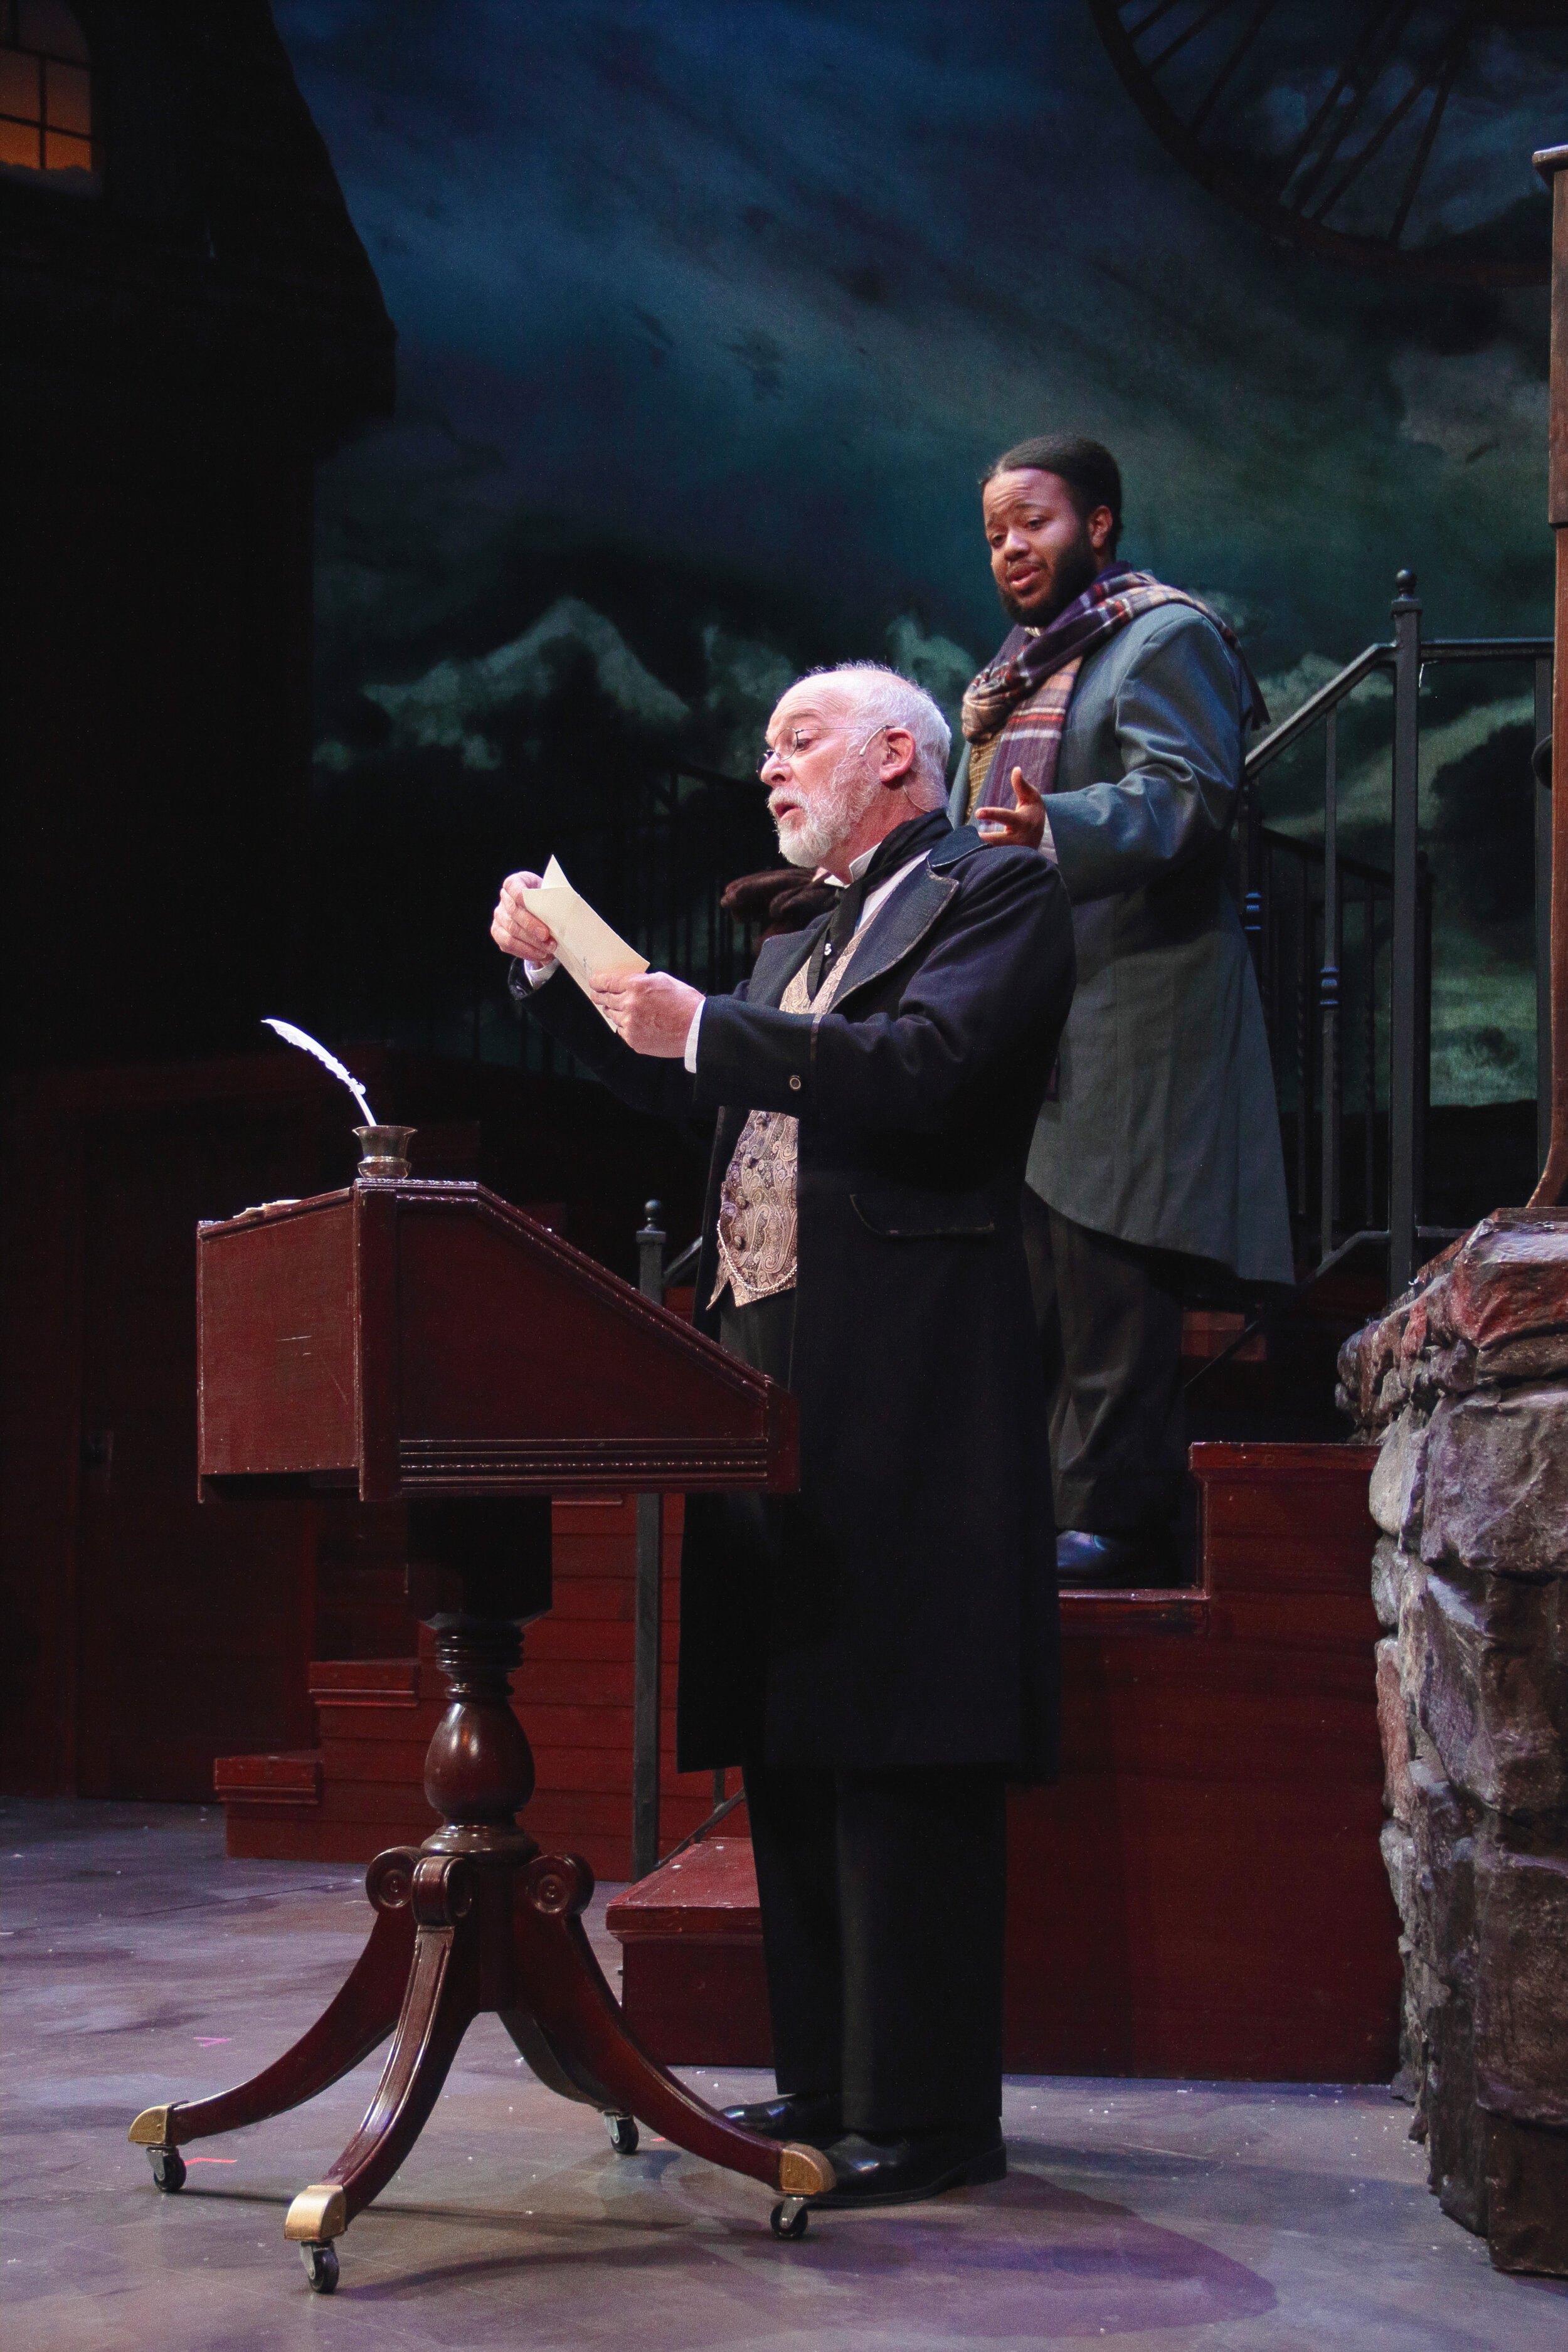 Steven Minow and Teddy Holmes in A CHRISTMAS CAROL at Virginia Stage Company 2019. Photo by Samuel W. Flint_____EDIT.jpg